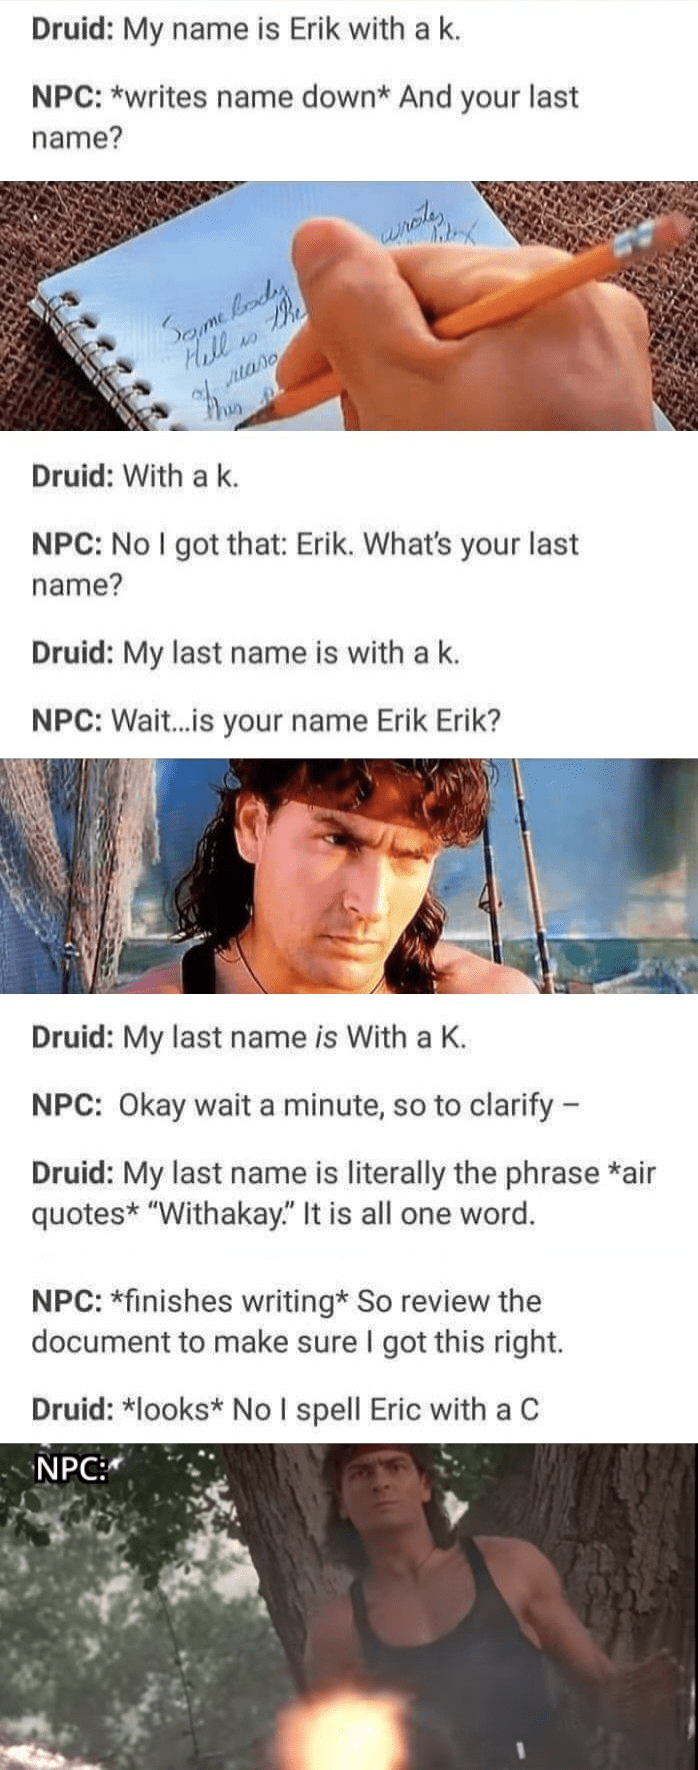 finishes-writing-so-review-document-make-sure-got-this-right-druid-looks-no-spell-eric-with-c-...png